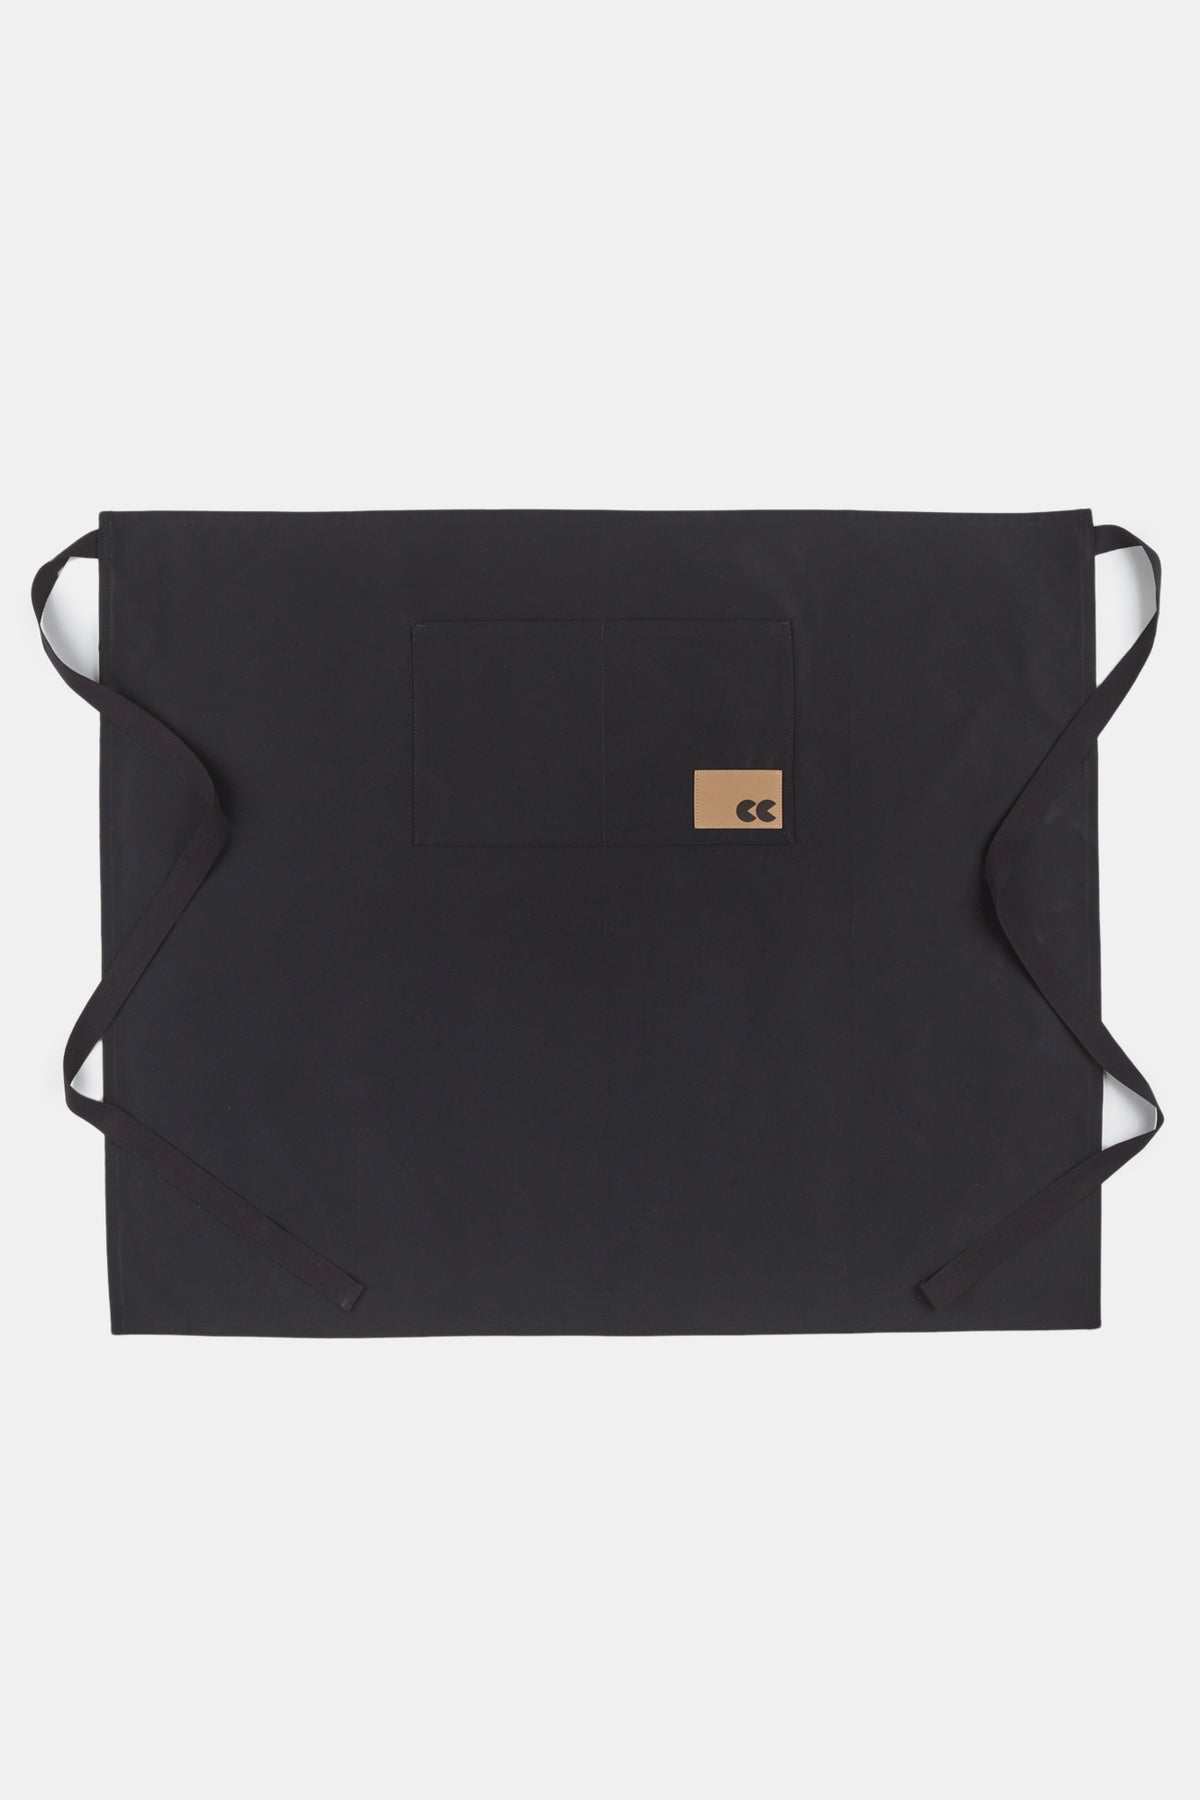 
            Flatlay image of unisex half apron in black with front pocket and CC logo patch